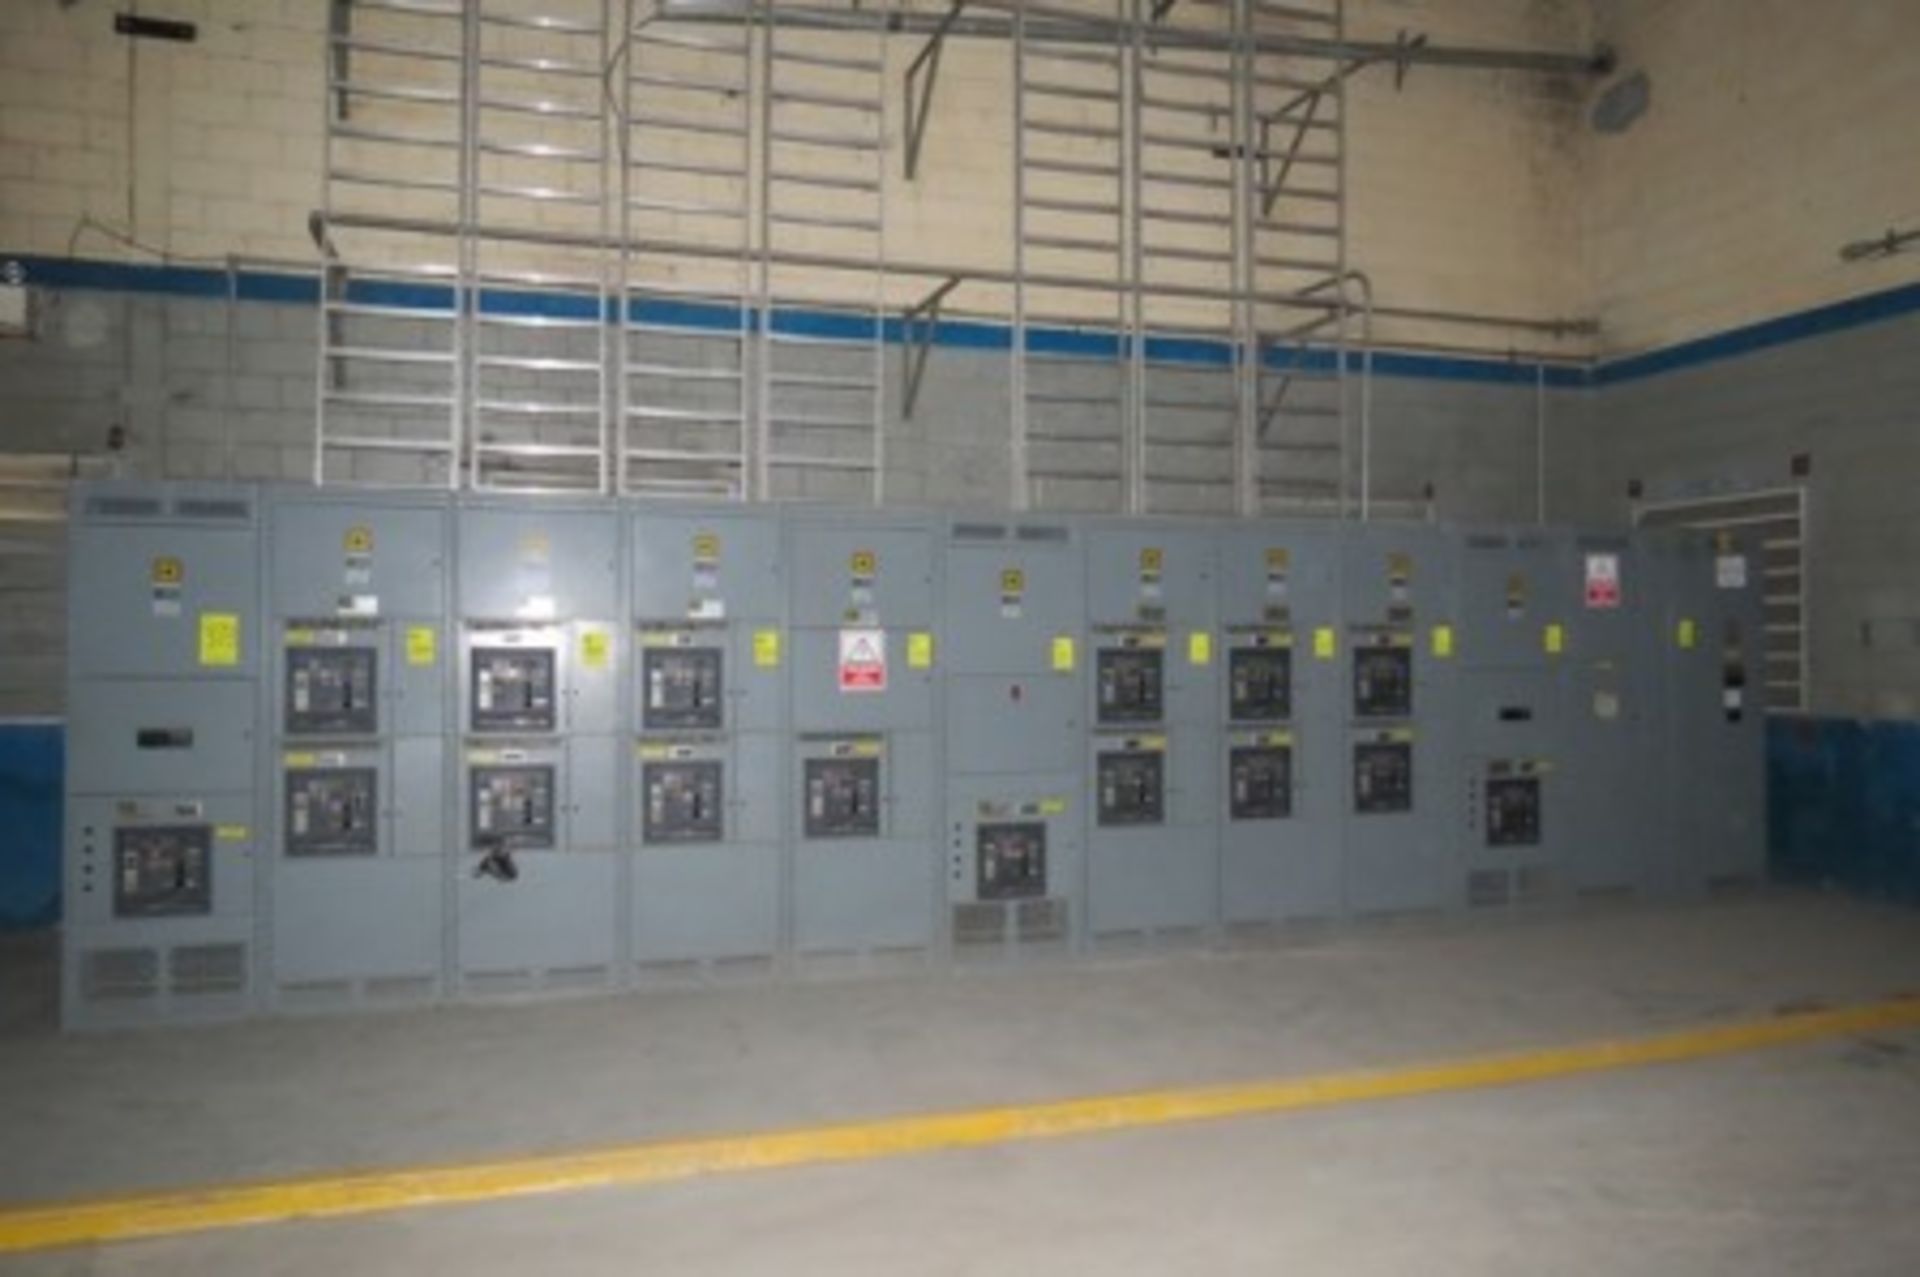 SD low voltage distribution board, (16)interruptors on 10 sections and 1 capacitor bank cabinet.